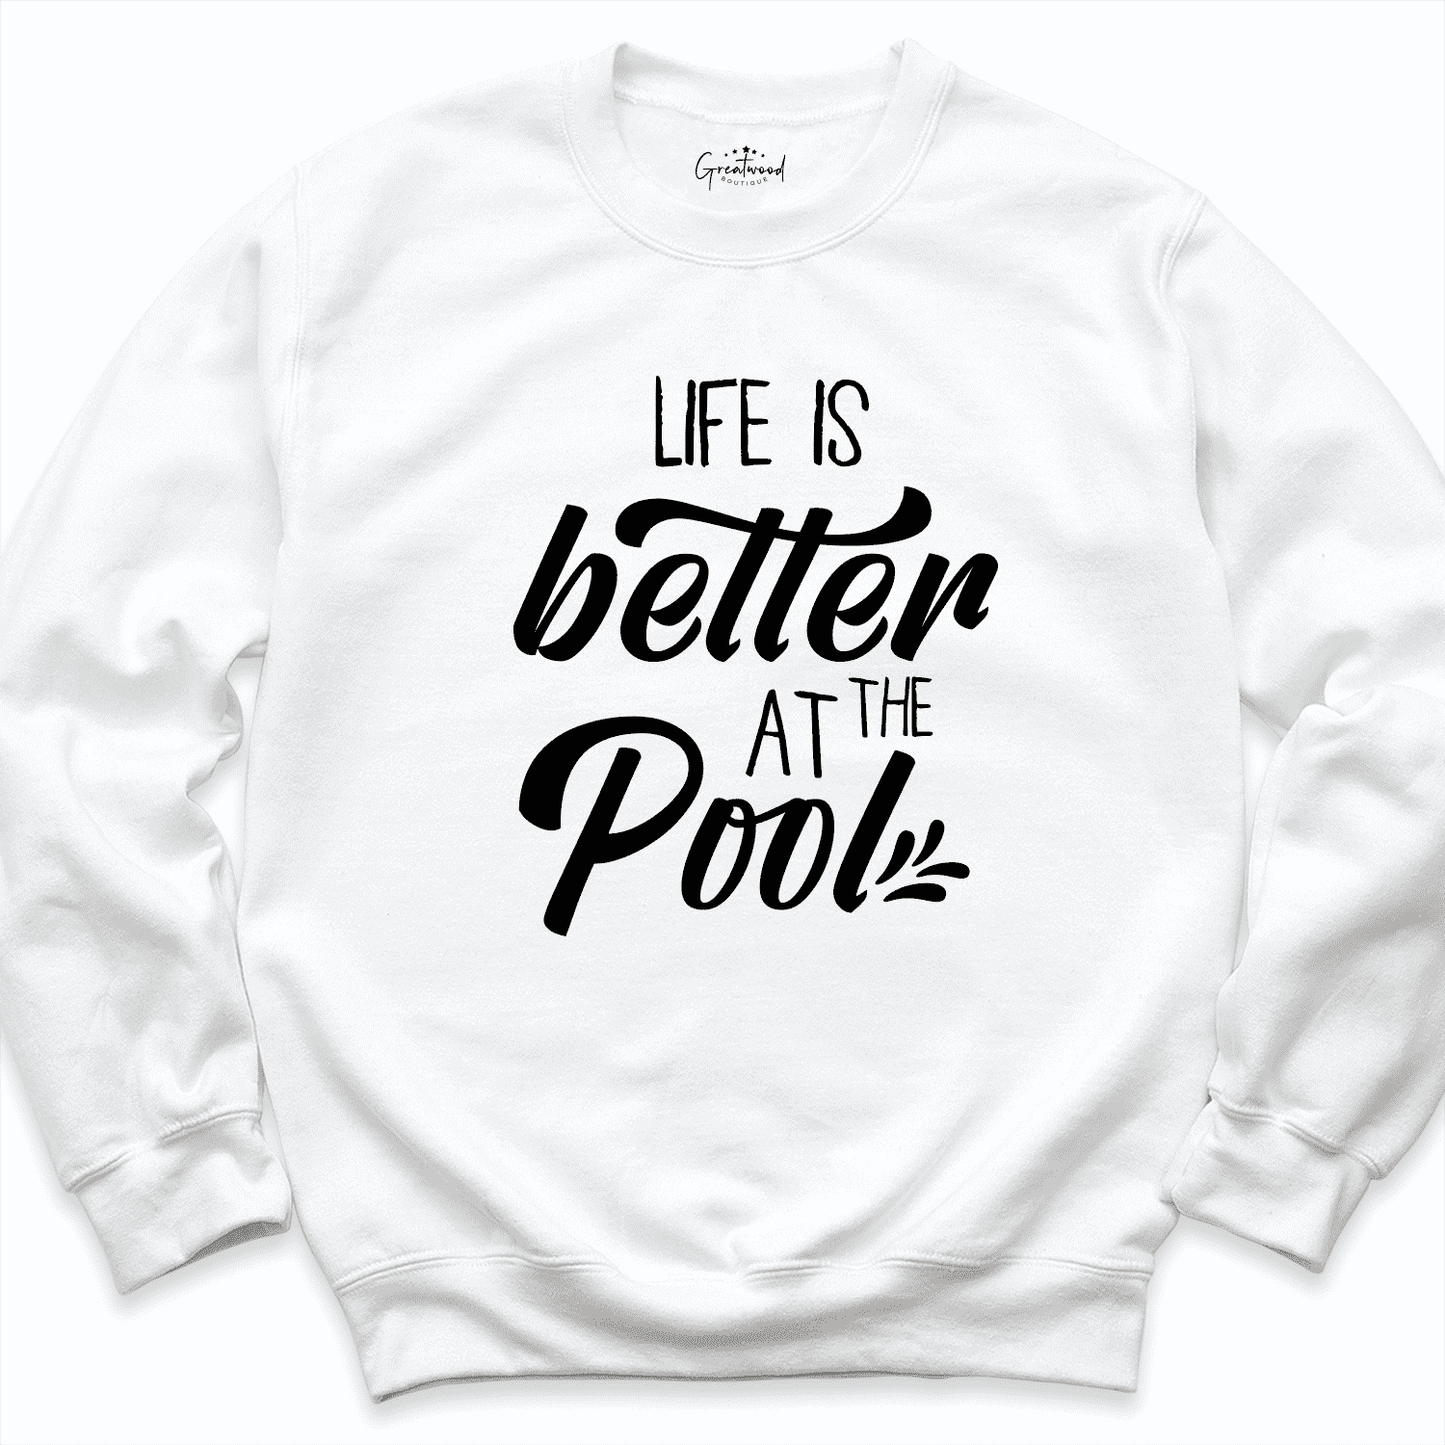 Life is Better at the Pool Sweatshirt White - Greatwood Boutique